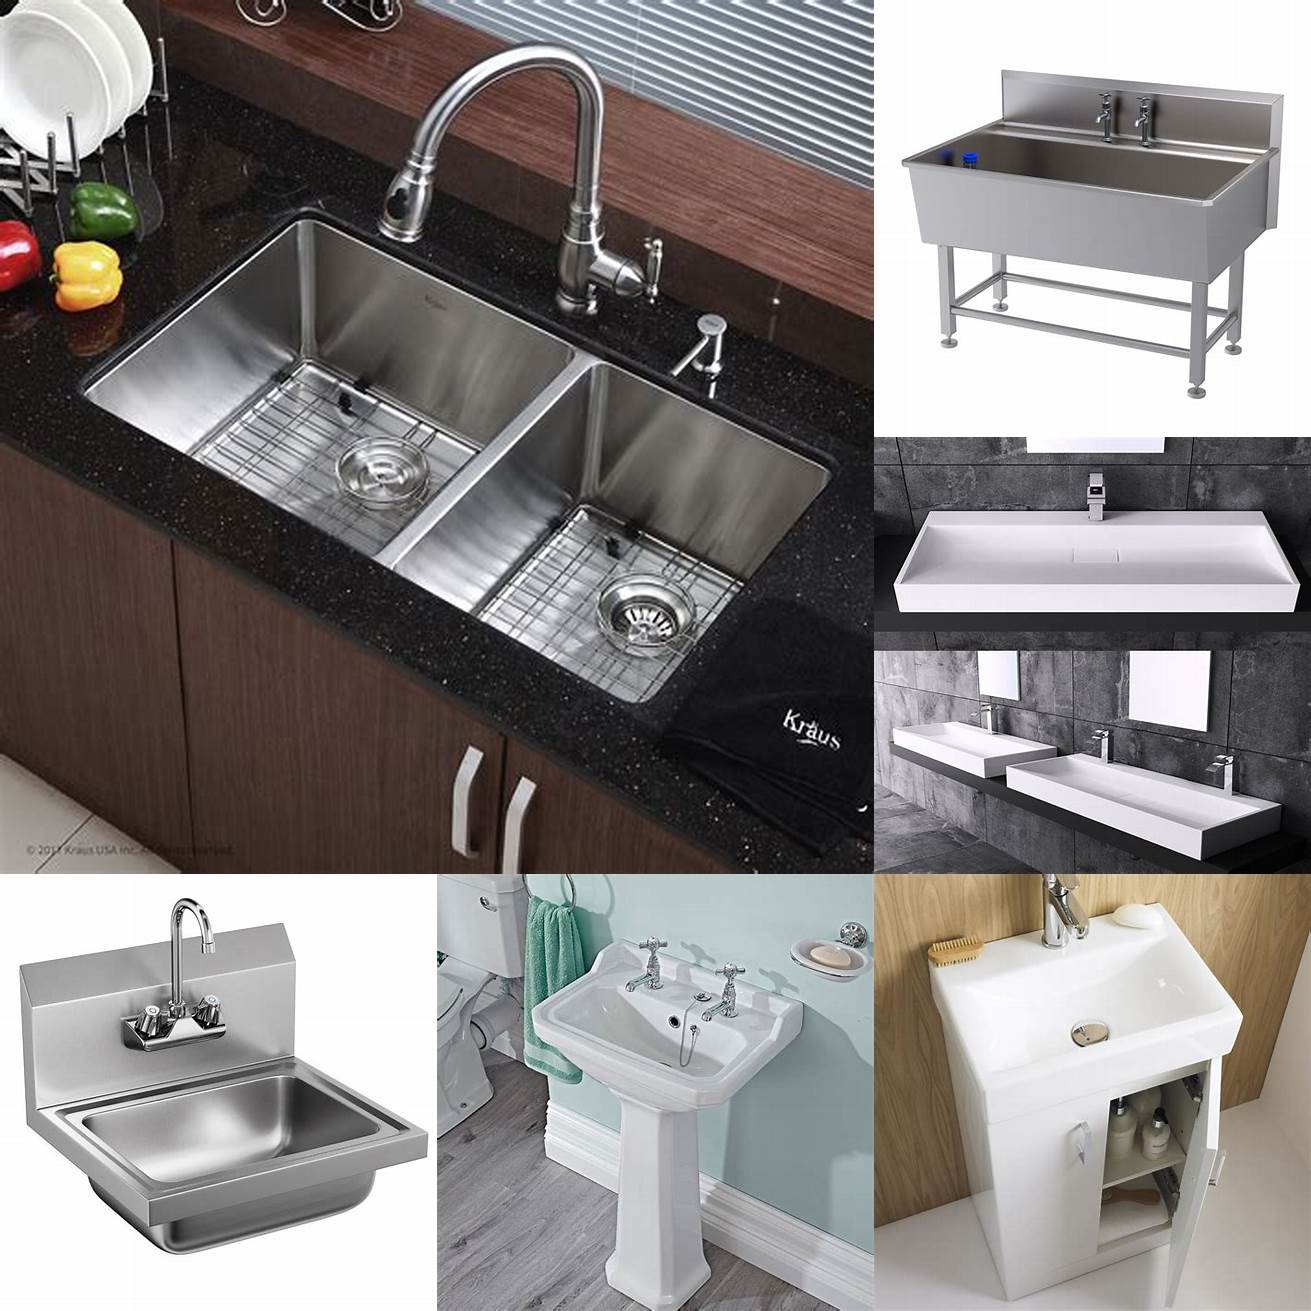 A large deep basin sink that is perfect for washing your face brushing your teeth or washing your hands